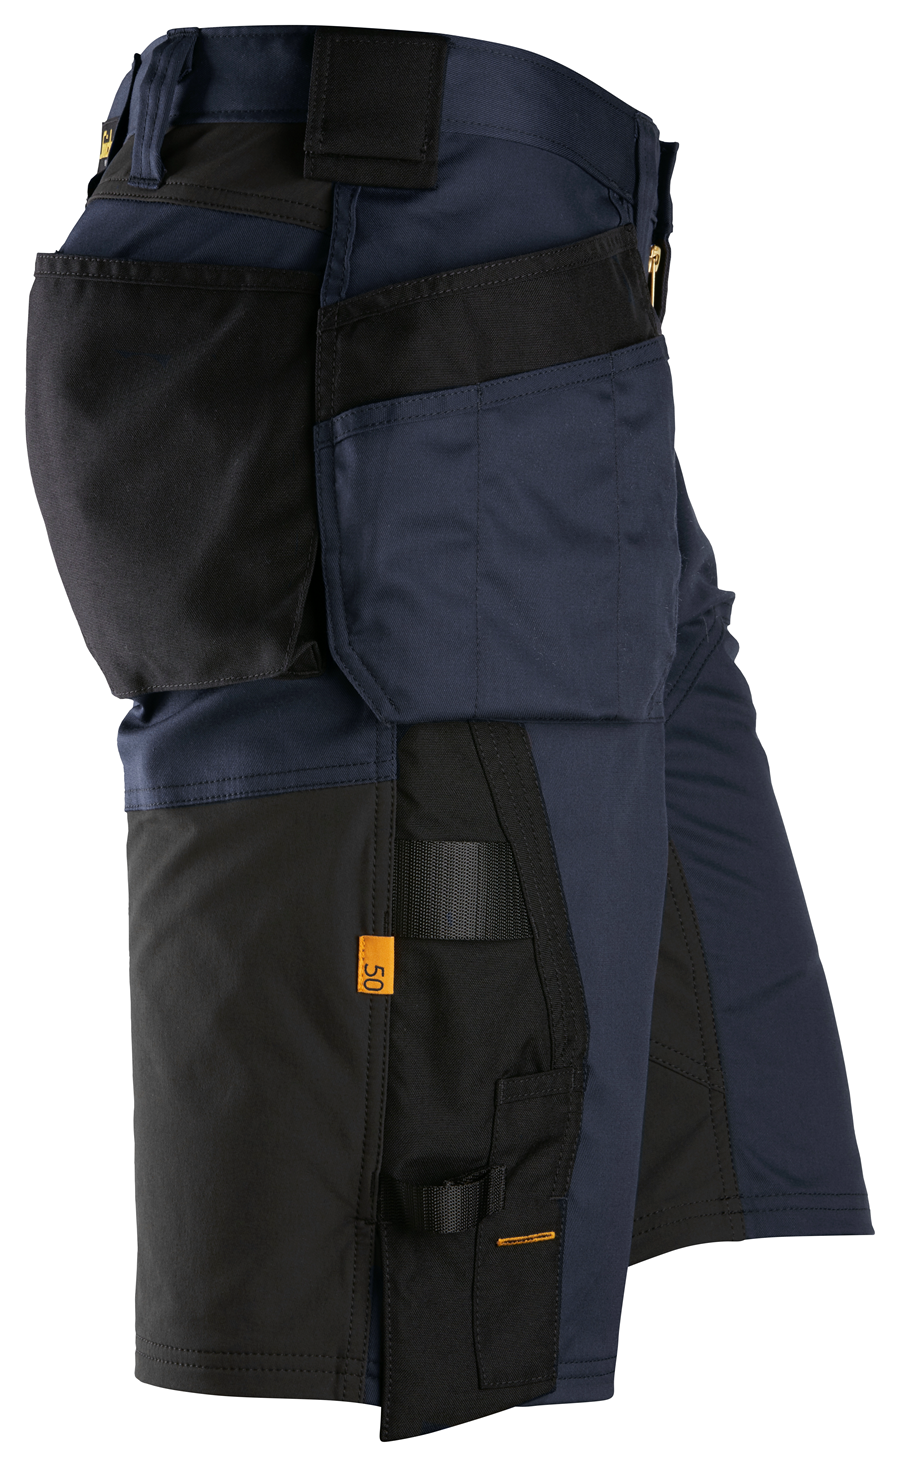 6151 | Work Fit Shorts Uniforms - Pockets Loose Holster A Z | Safety Centre to PPE AllroundWork, Snickers Stretch